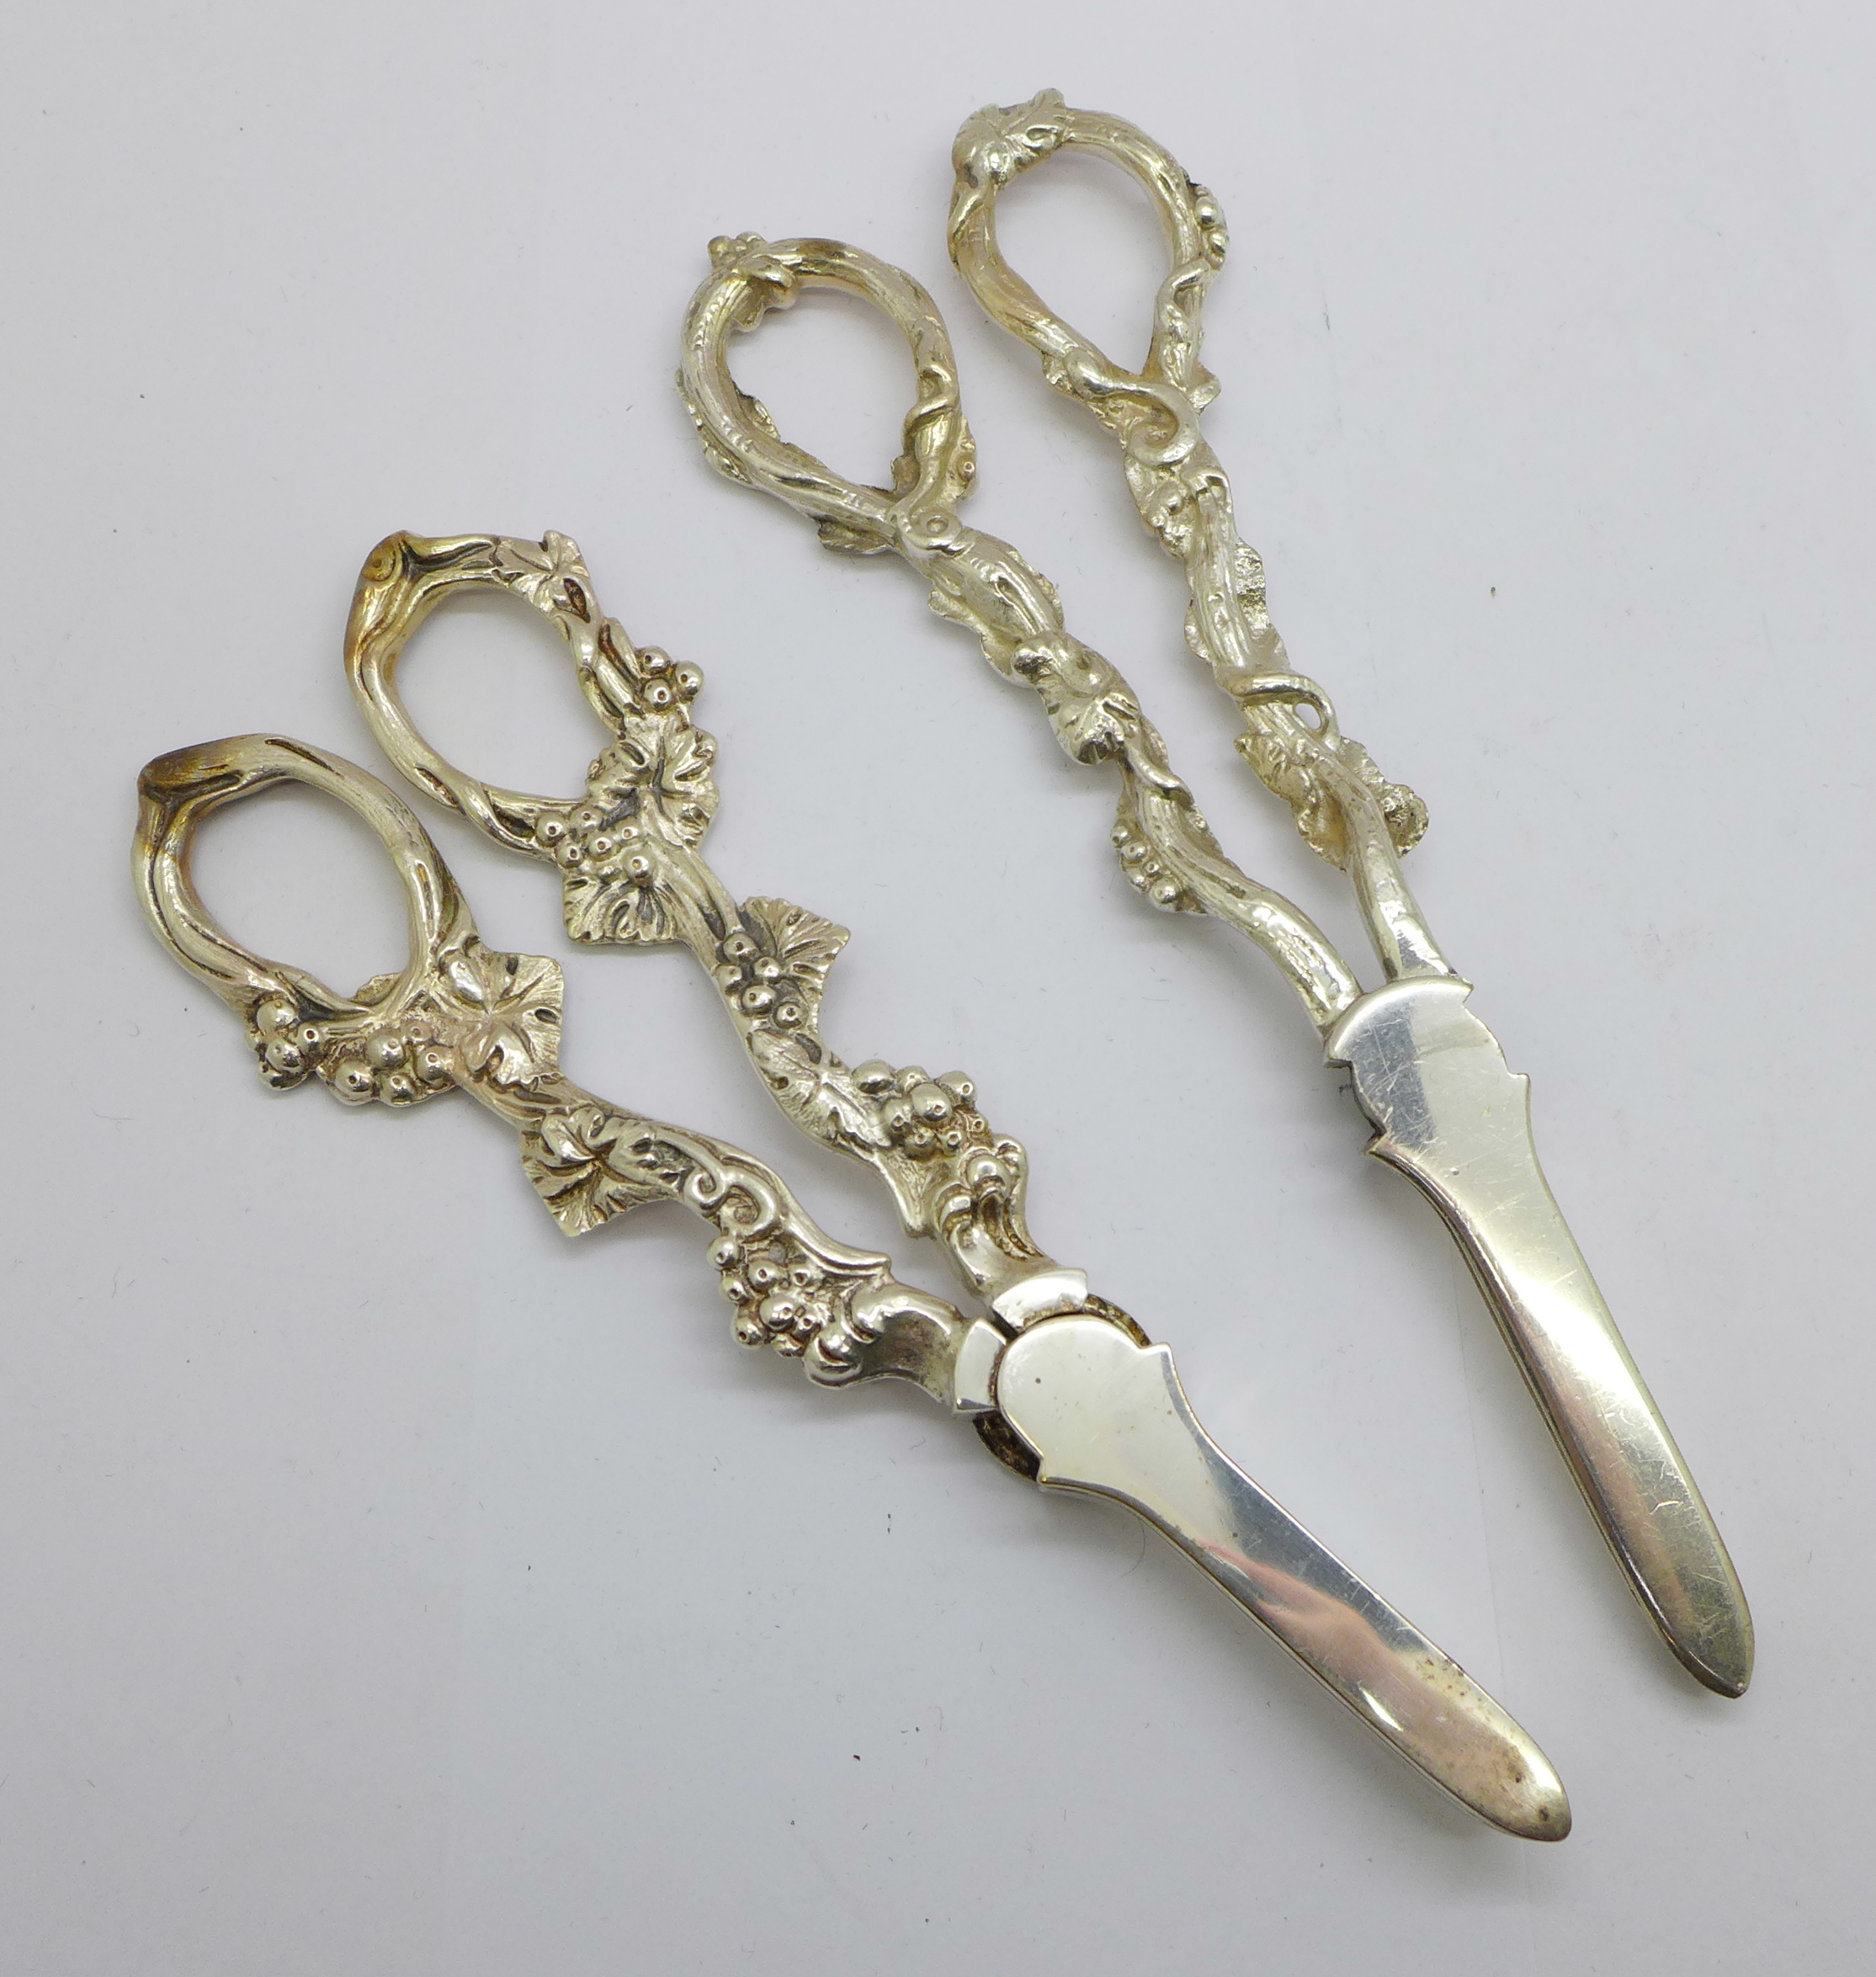 Two pairs of grape scissors, one a/f - Image 2 of 3